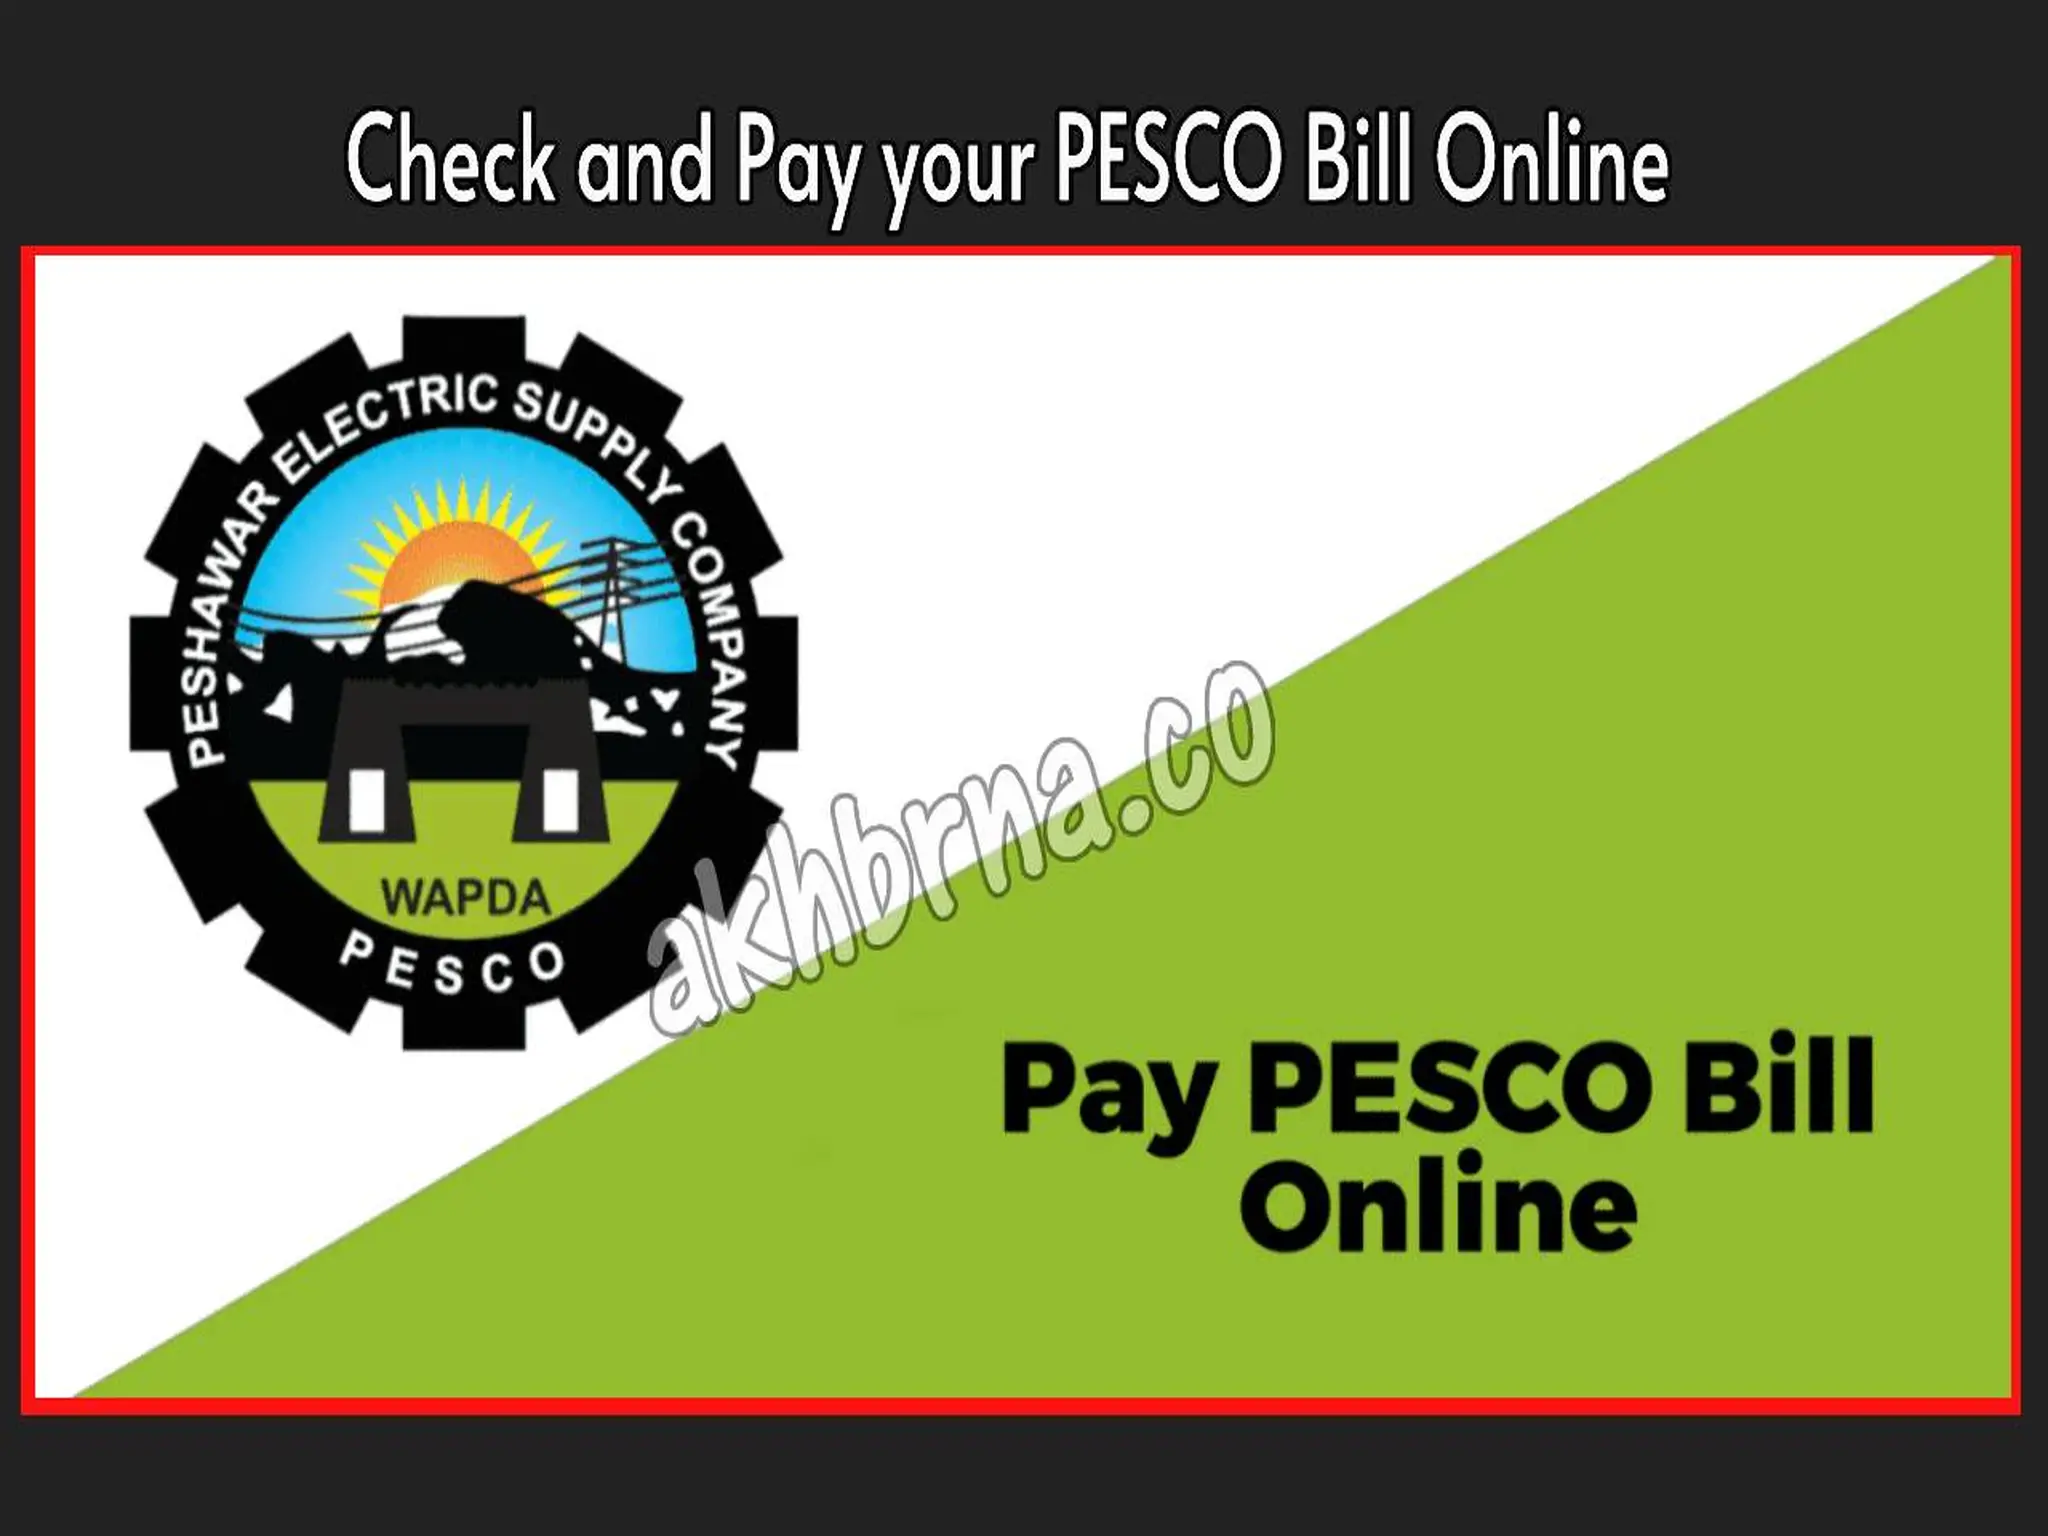 Check and Pay your PESCO Bill Online: A Convenient Solution for Bill Payments